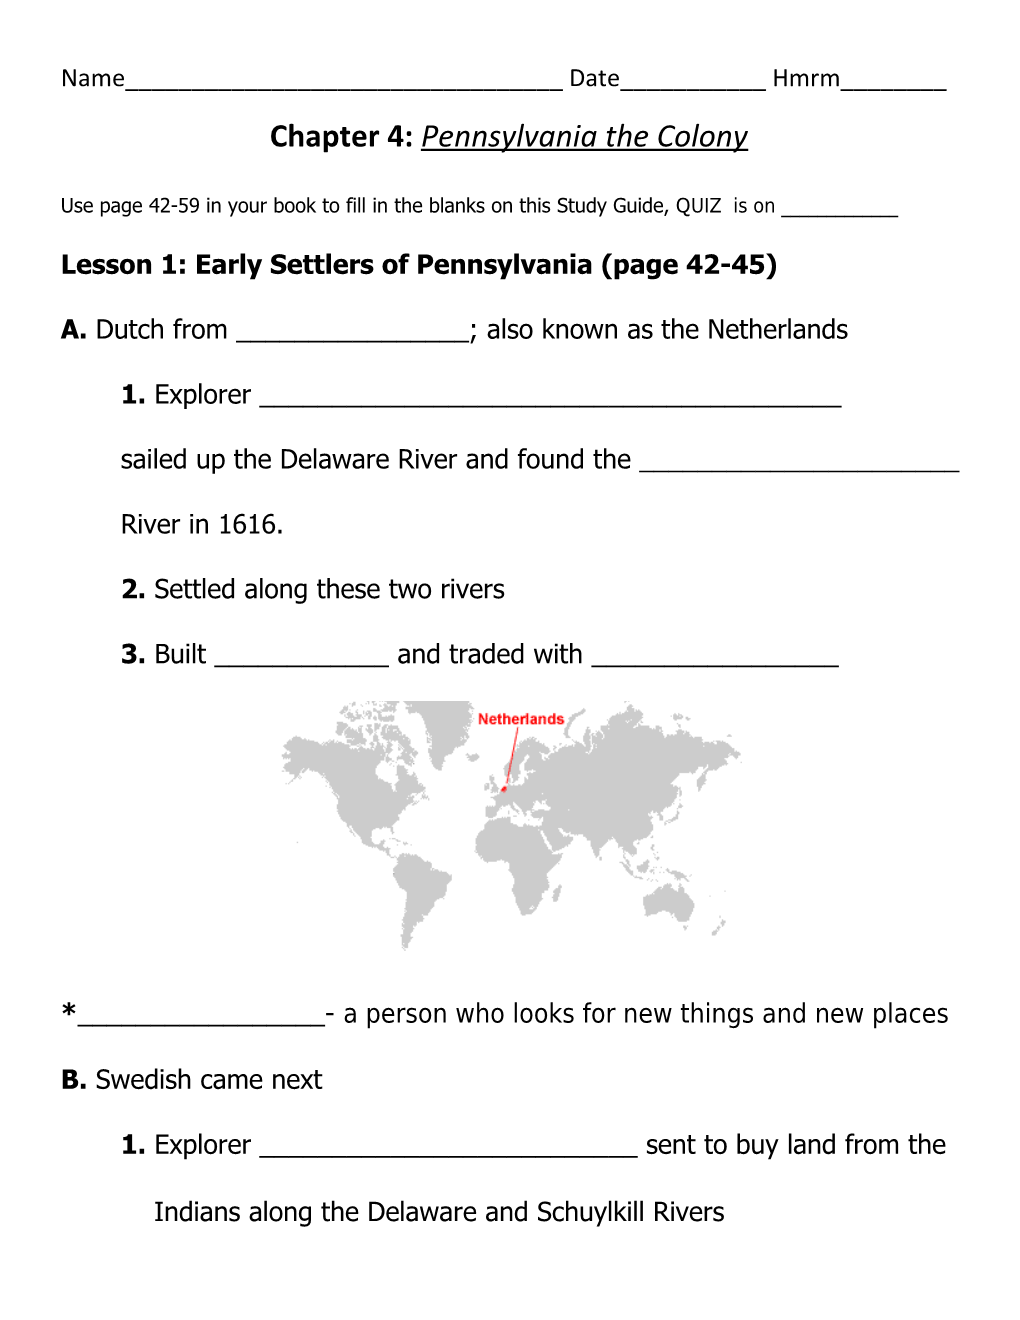 Lesson 1: Early Settlers of Pennsylvania (Page 42-45)